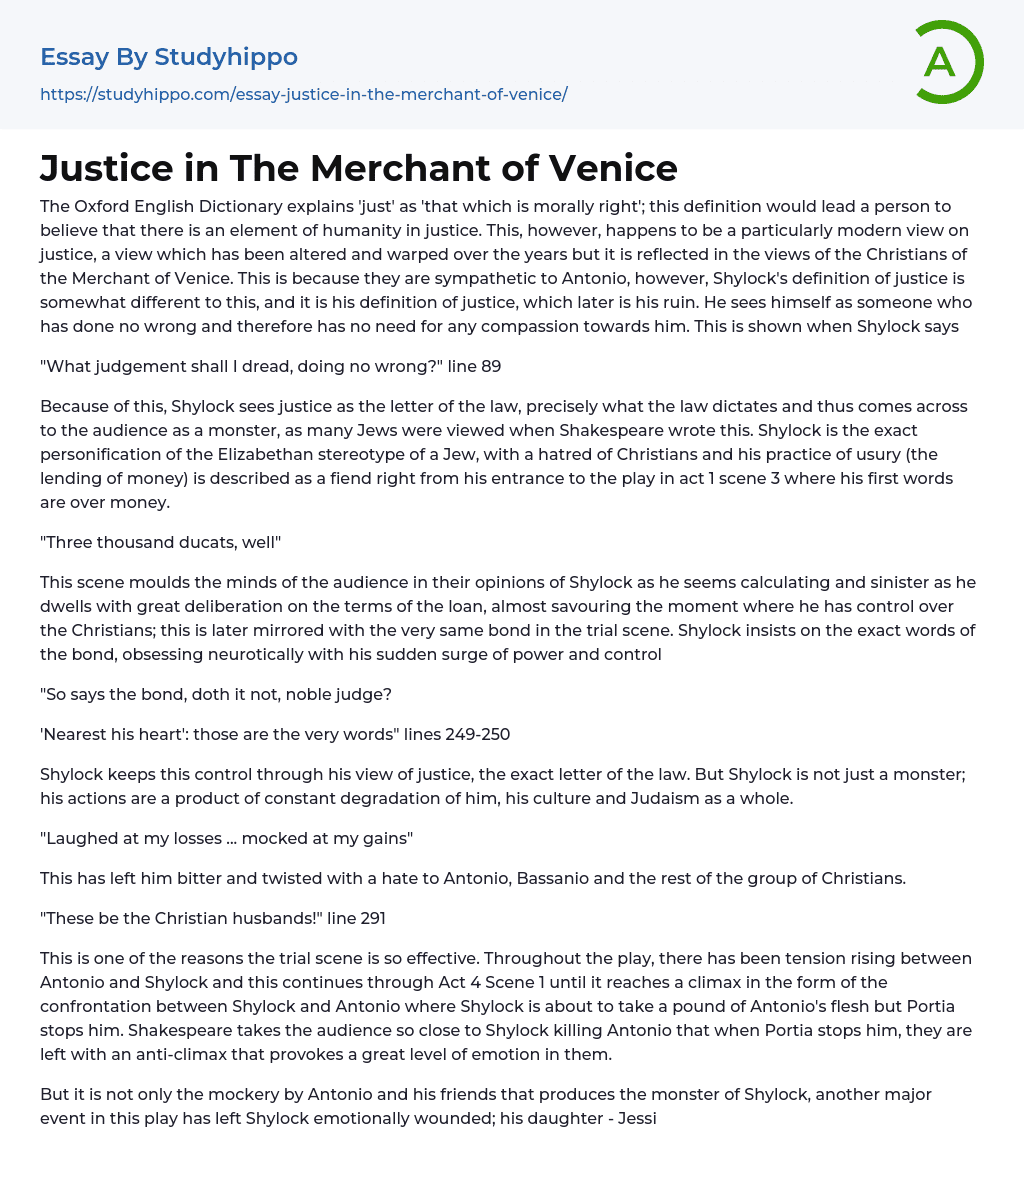 merchant of venice essay questions and answers